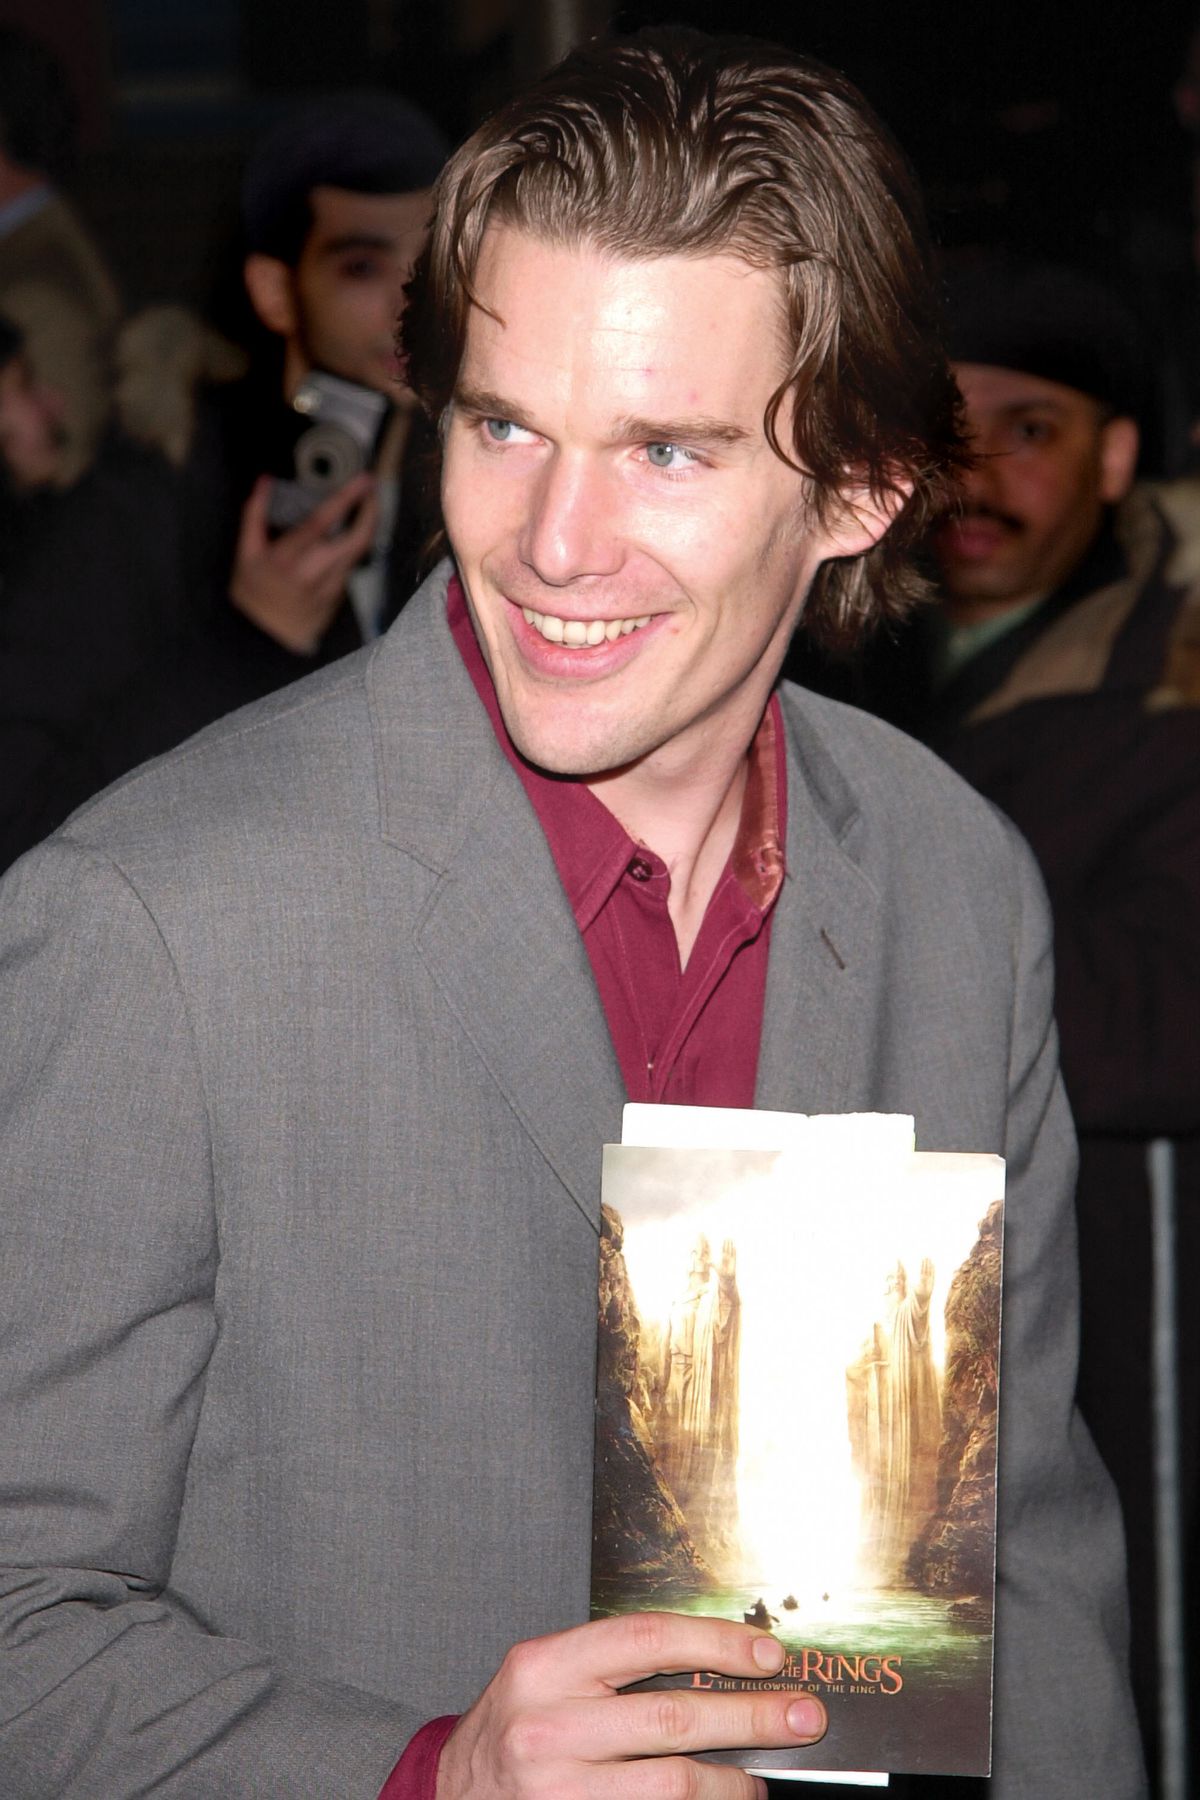 Ethan Hawke holding up a branded folio at the New York premiere of The Lord of the Rings: The Fellowship of the Ring